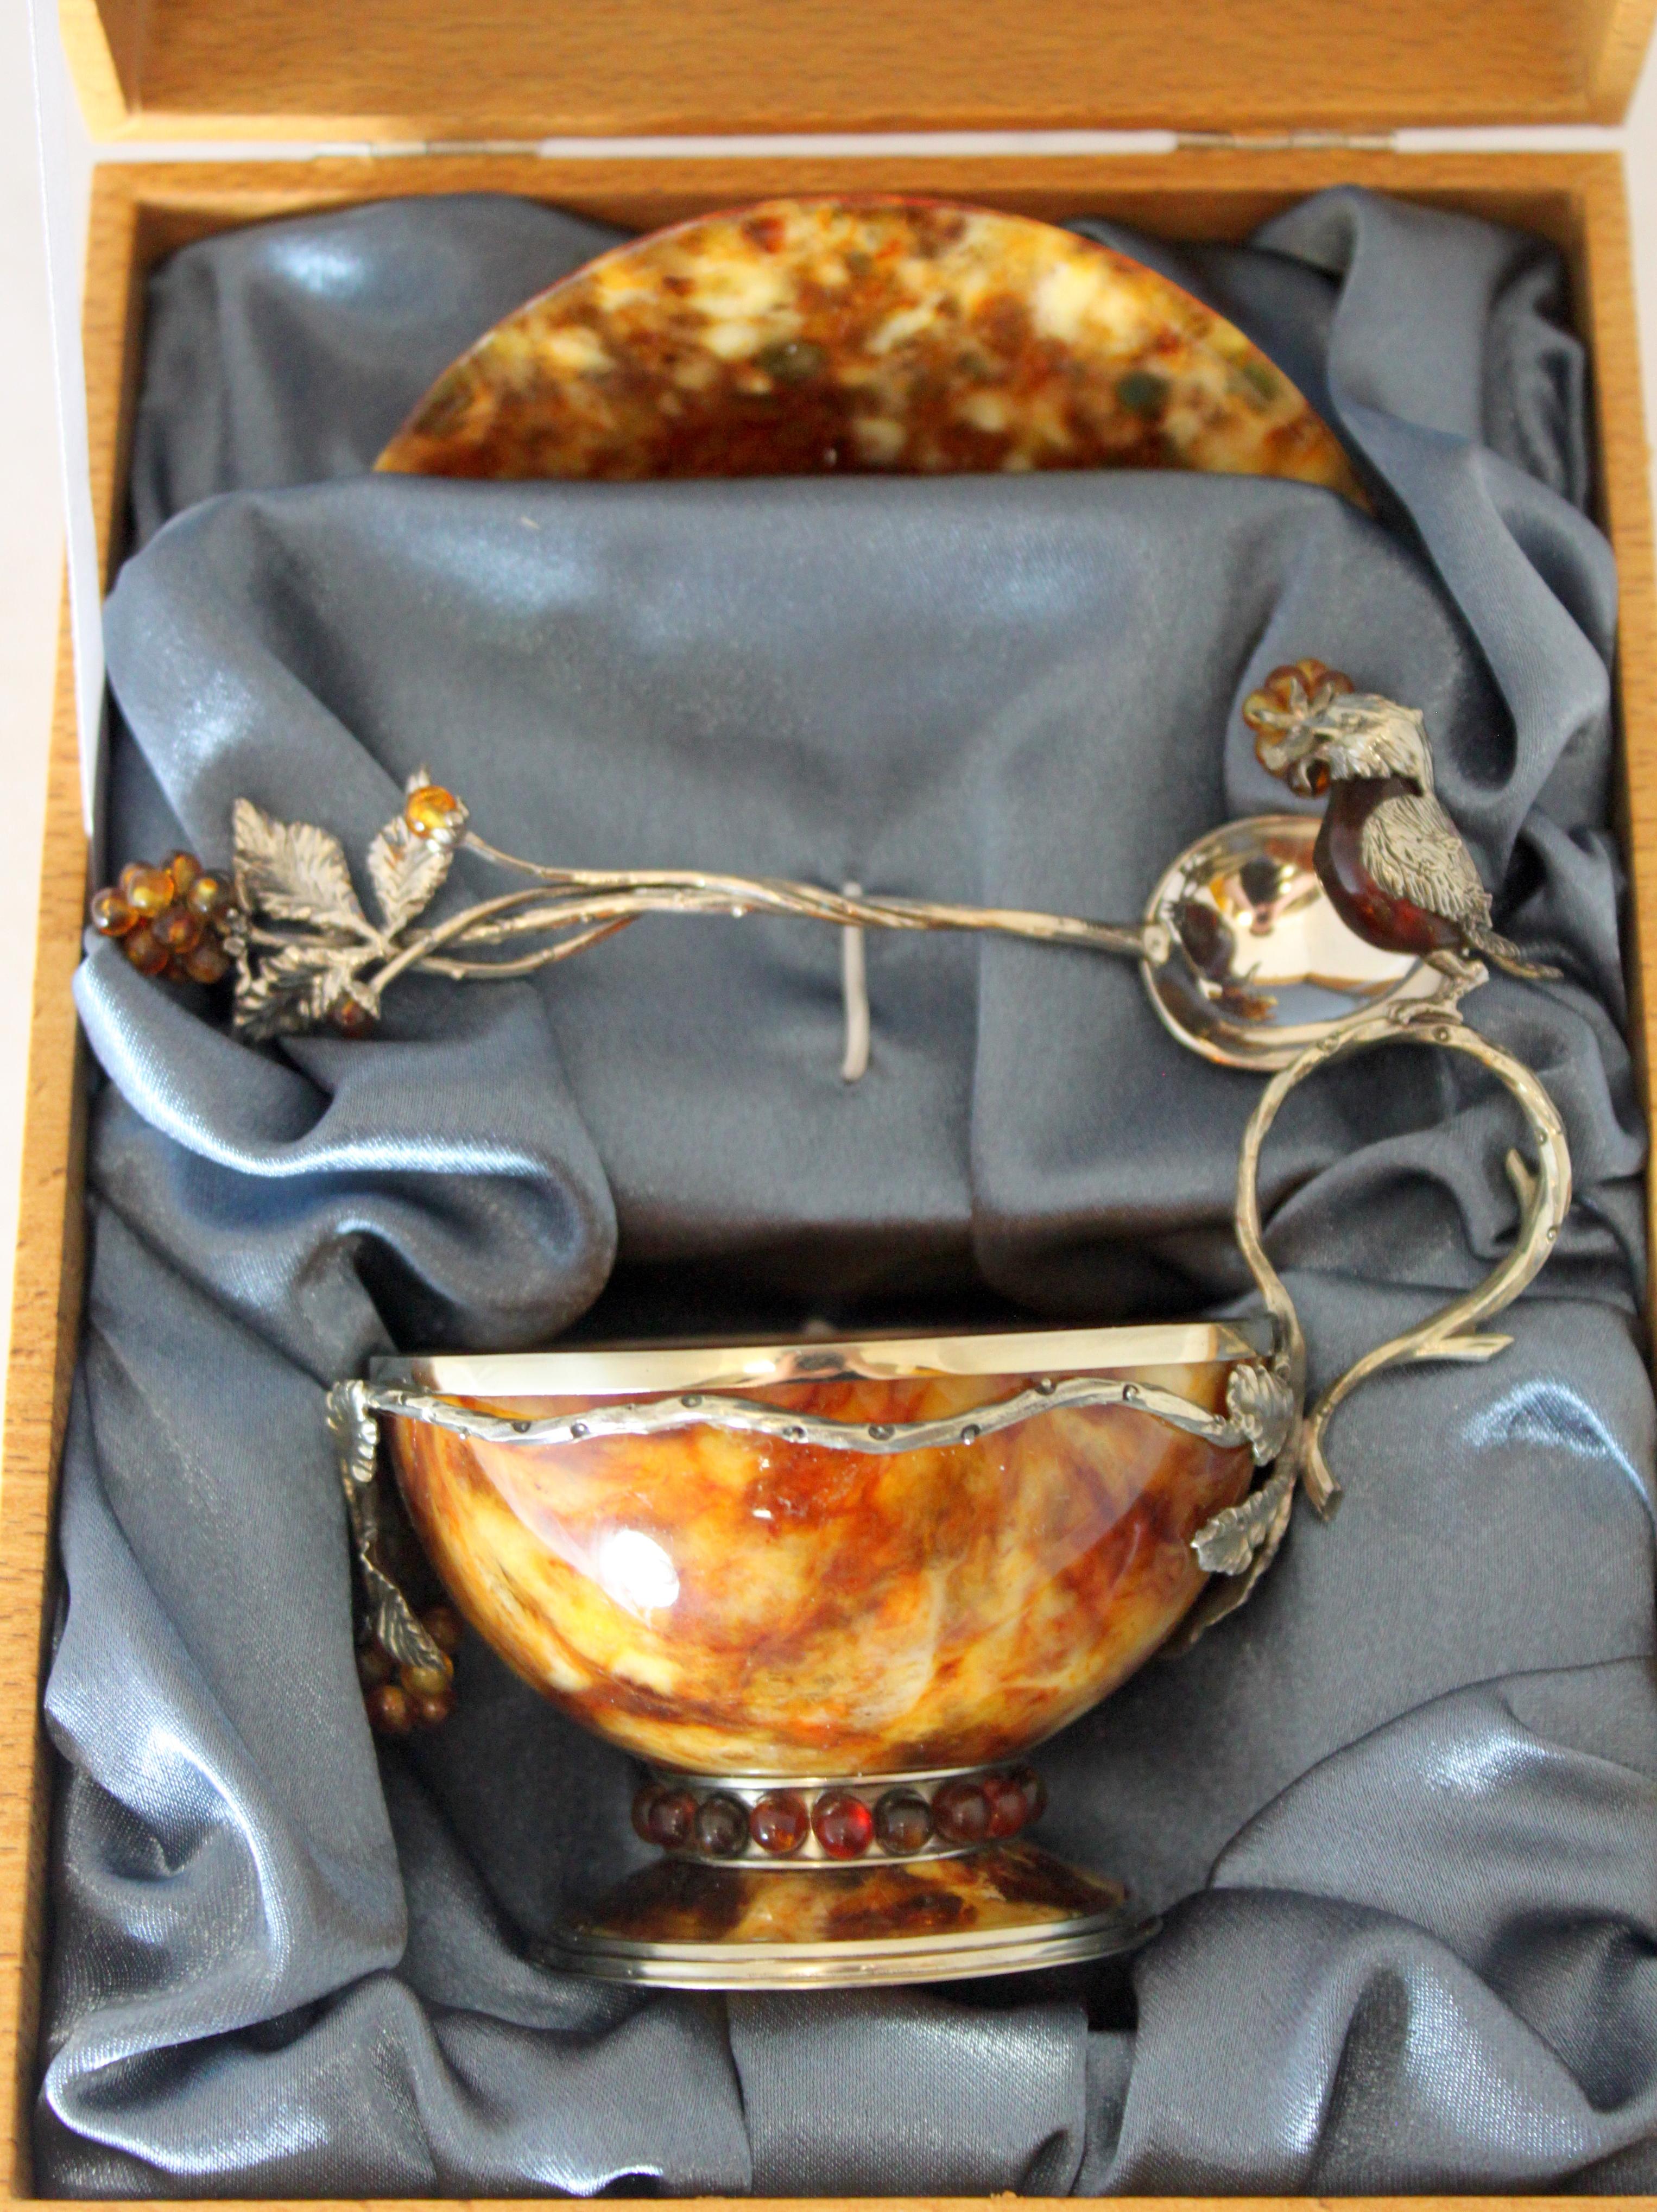 Vintage Russian silver and amber tea cup set
Made in Russia, circa 1990s
Fully hallmarked

Dimensions:
Cup size: 11.4 x 8.3 x 11.3 cm
Weight: 110 grams

Plate size (Diameter x Height): 10.8 x 1.5 cm
Weight: 40 grams

Spoon size: 12.5 x